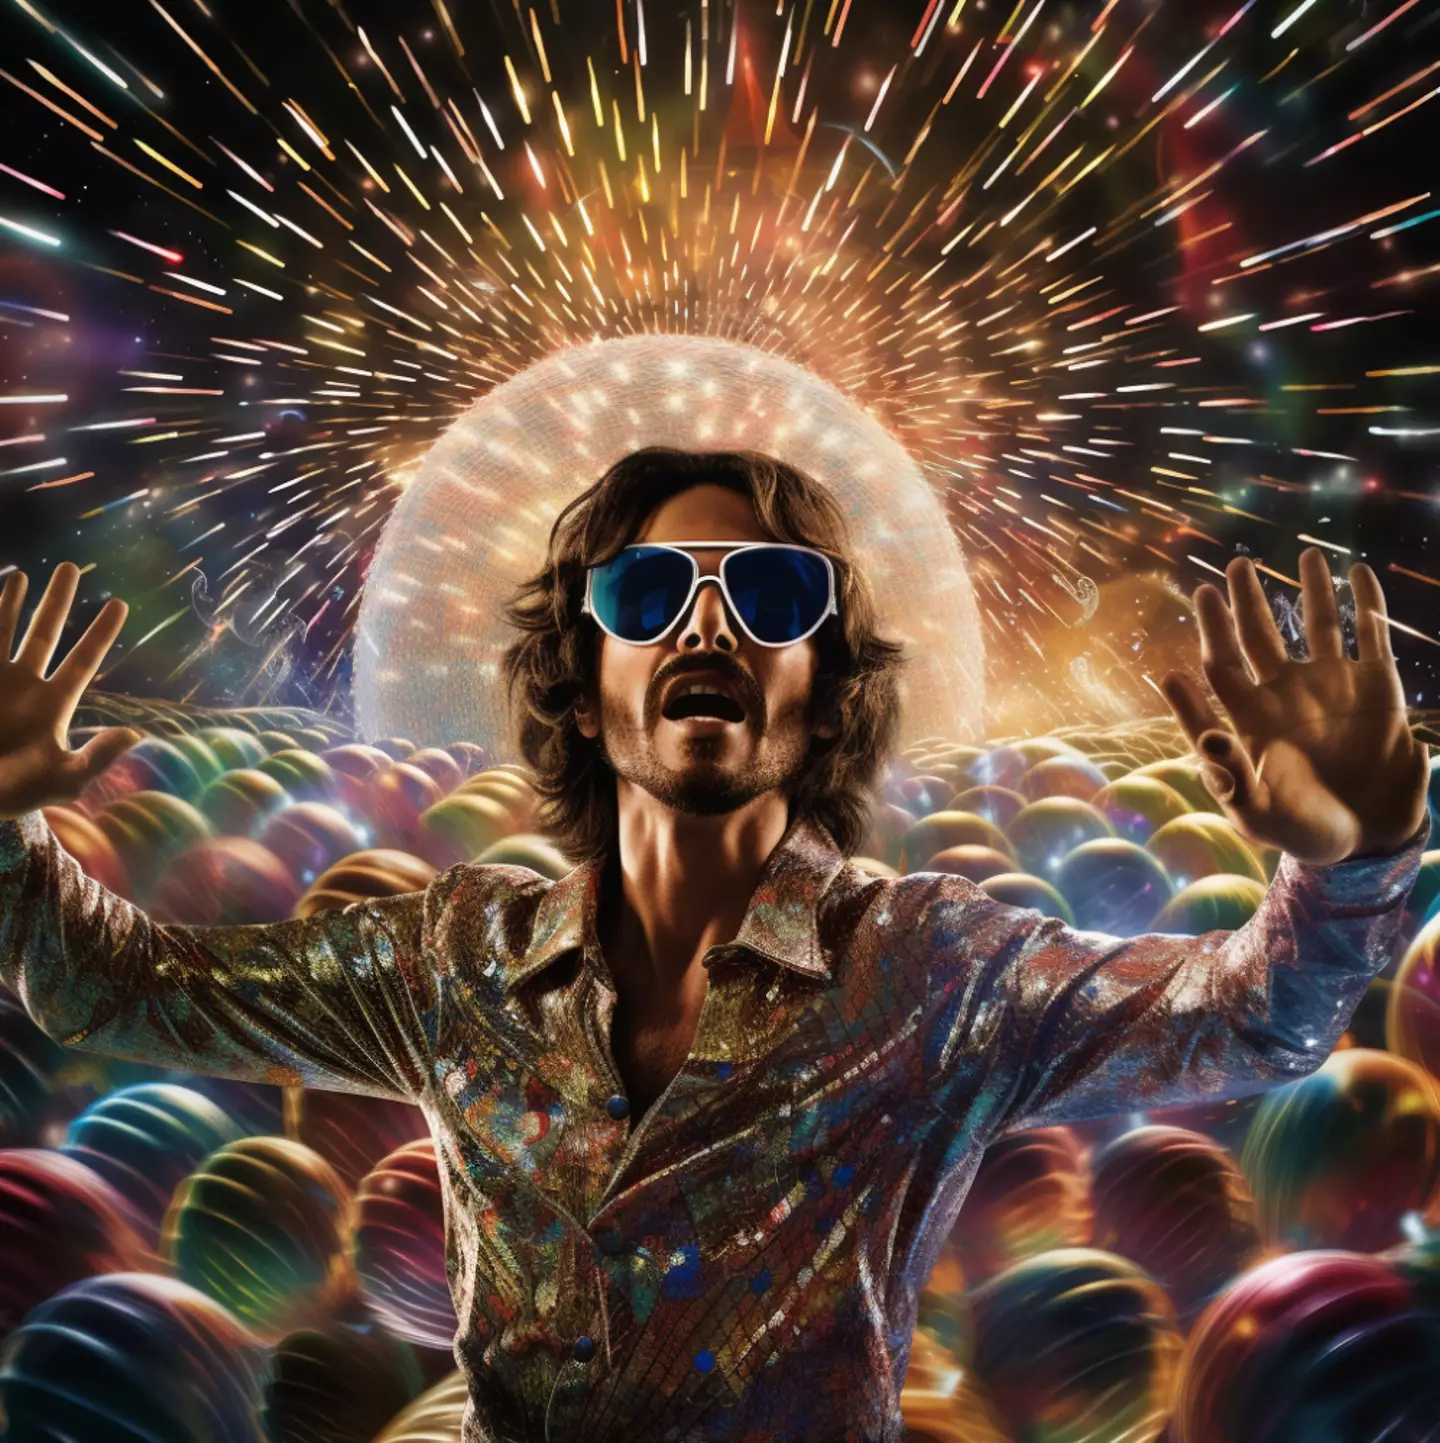 It turns out Jesus returned some time ago but just got really into disco.